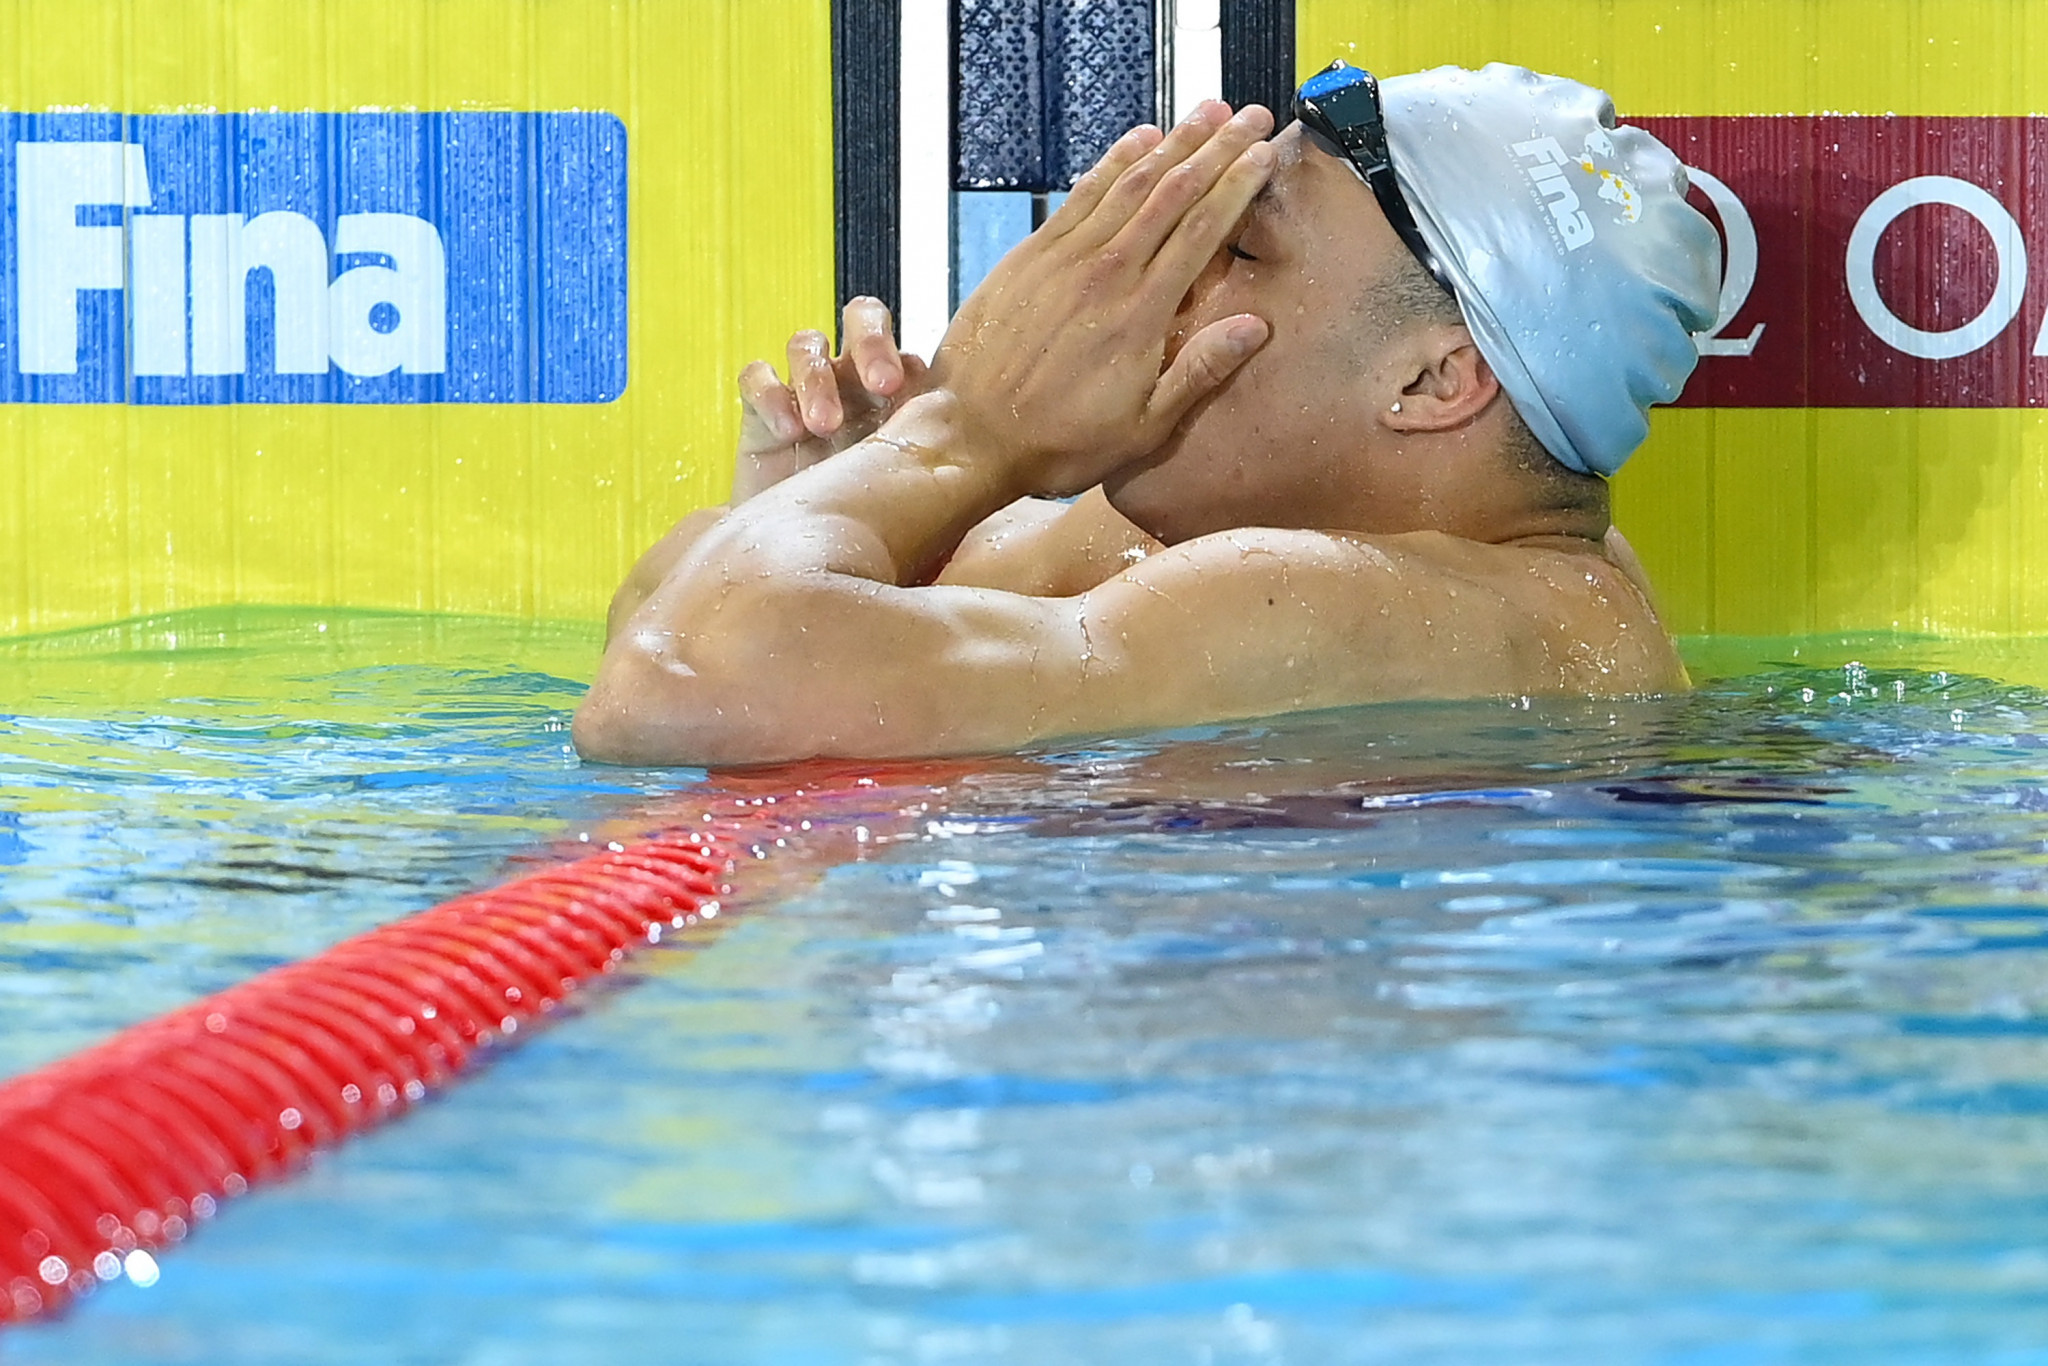 Jordan Crooks of the Cayman Islands looks in disbelief after winning men's 50 metres freestyle gold ©Getty Images